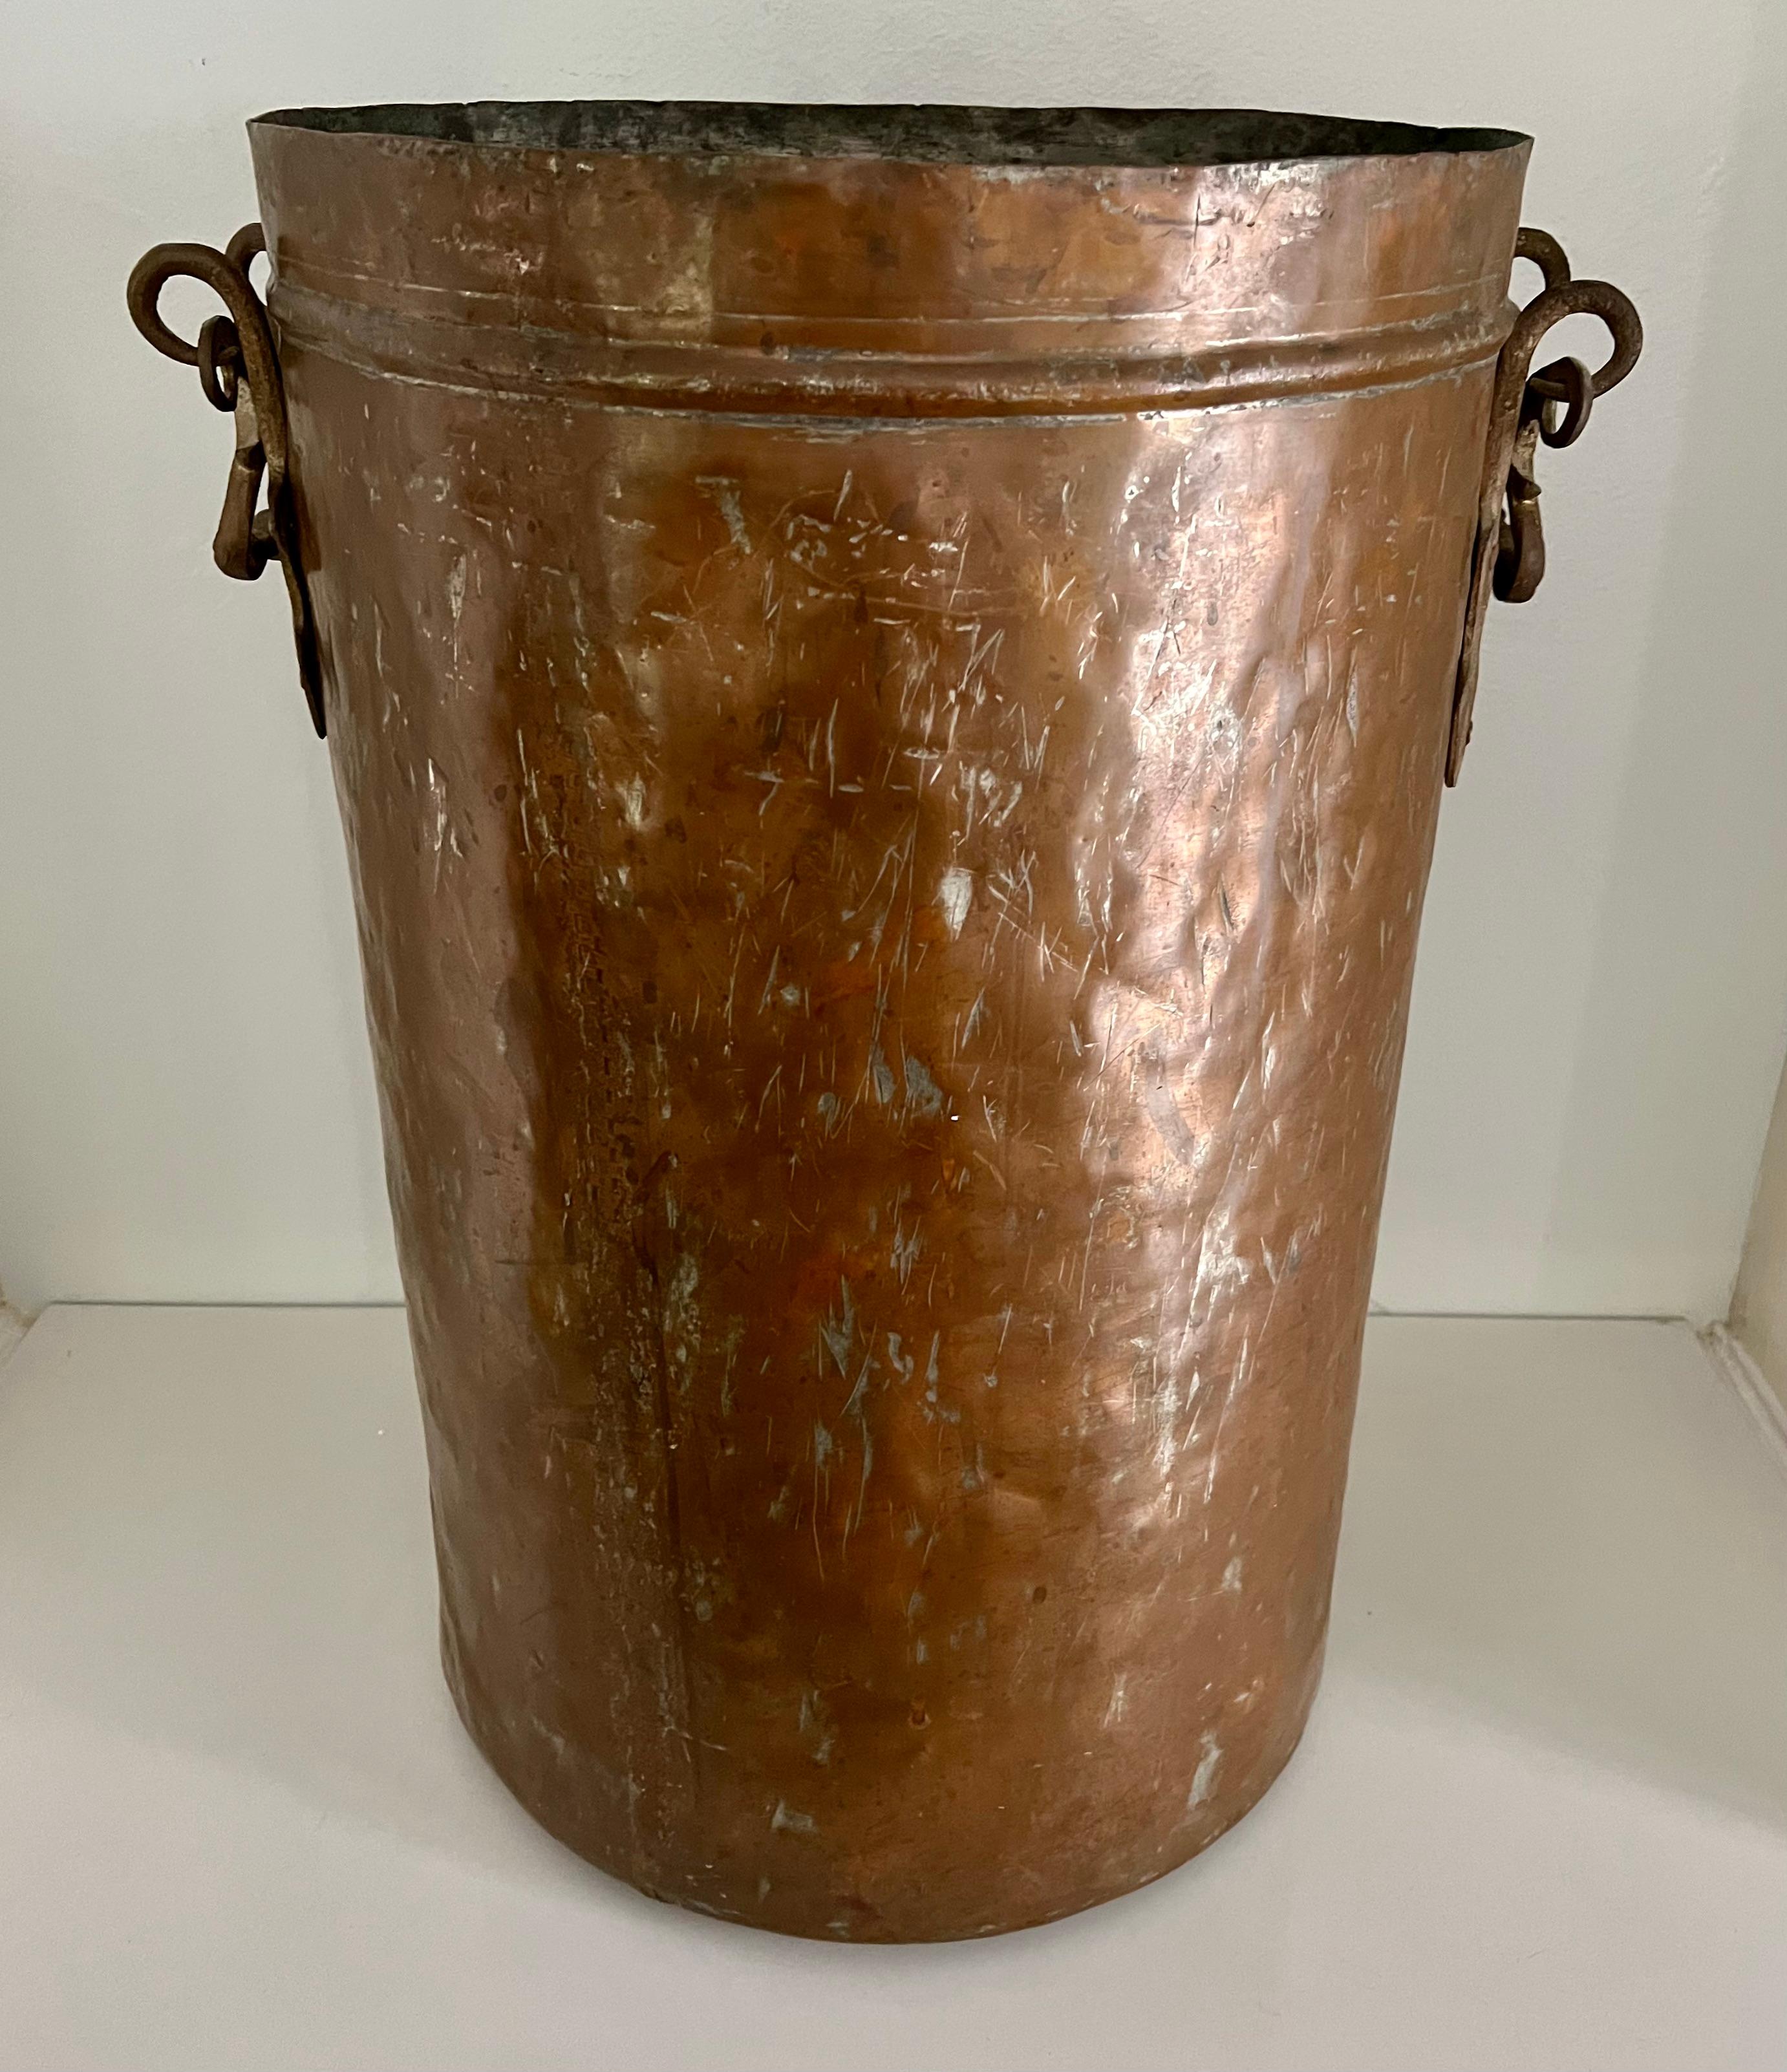 A very large and tall copper bucket, perfectly suited for firewood, coal or even as a planter, jardiniere. The piece is very well made and has substantial hand wrought handles. A lovely piece for the kitchen cabin or fireplace.